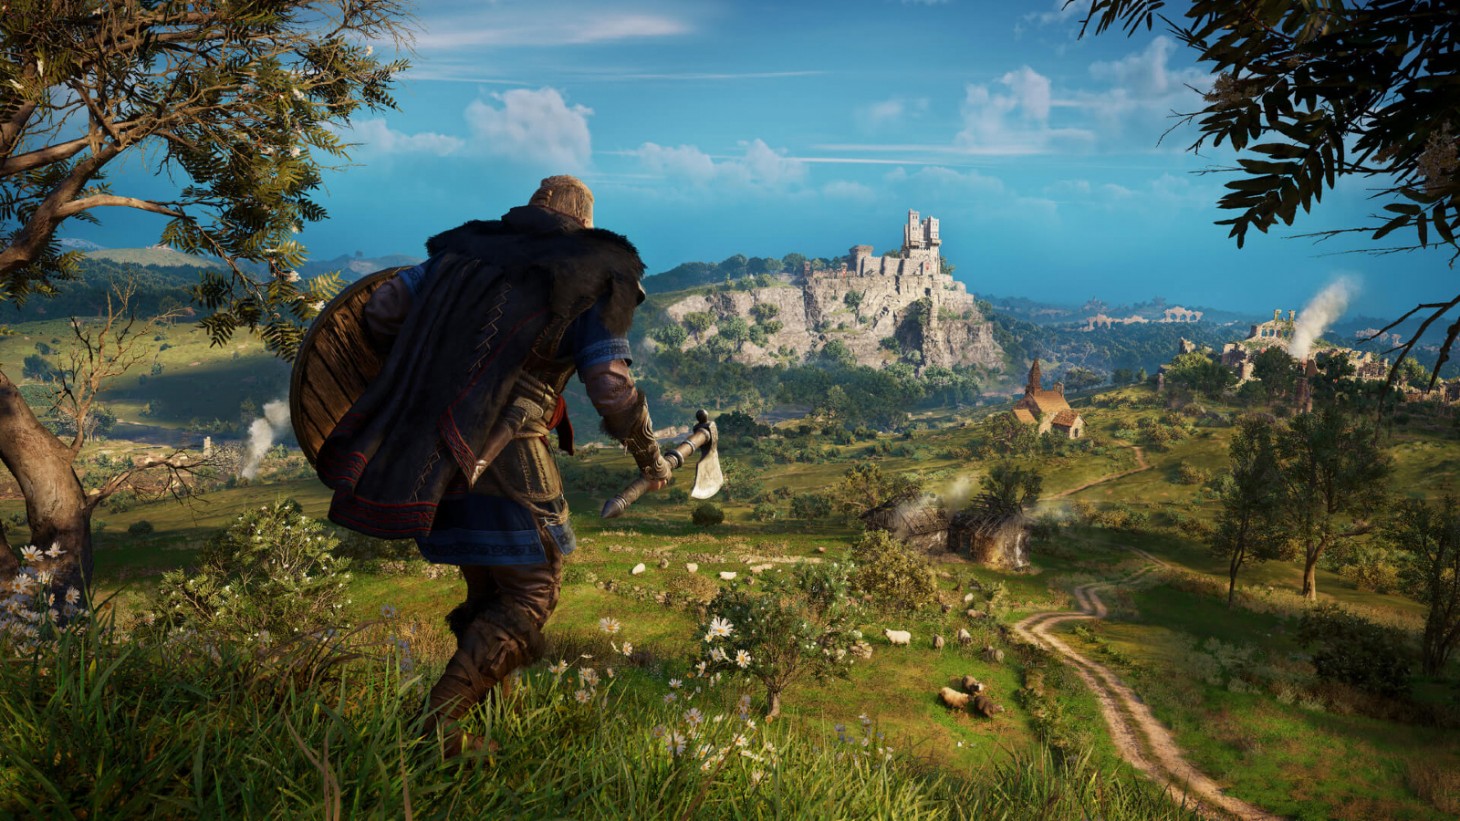 Assassin's Creed: Valhalla is coming to Steam according to Ubisoft  Connect's Database leak